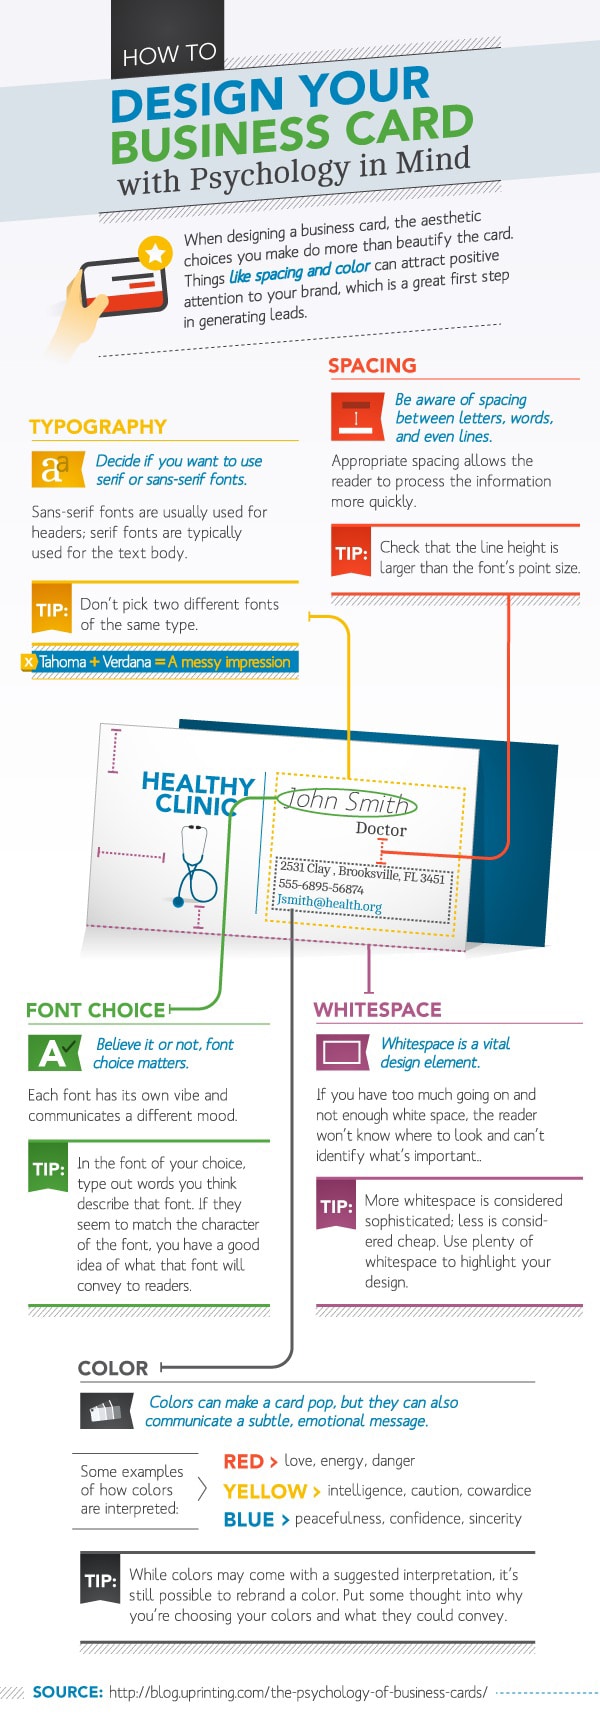 psychology-business-card-design-infographic